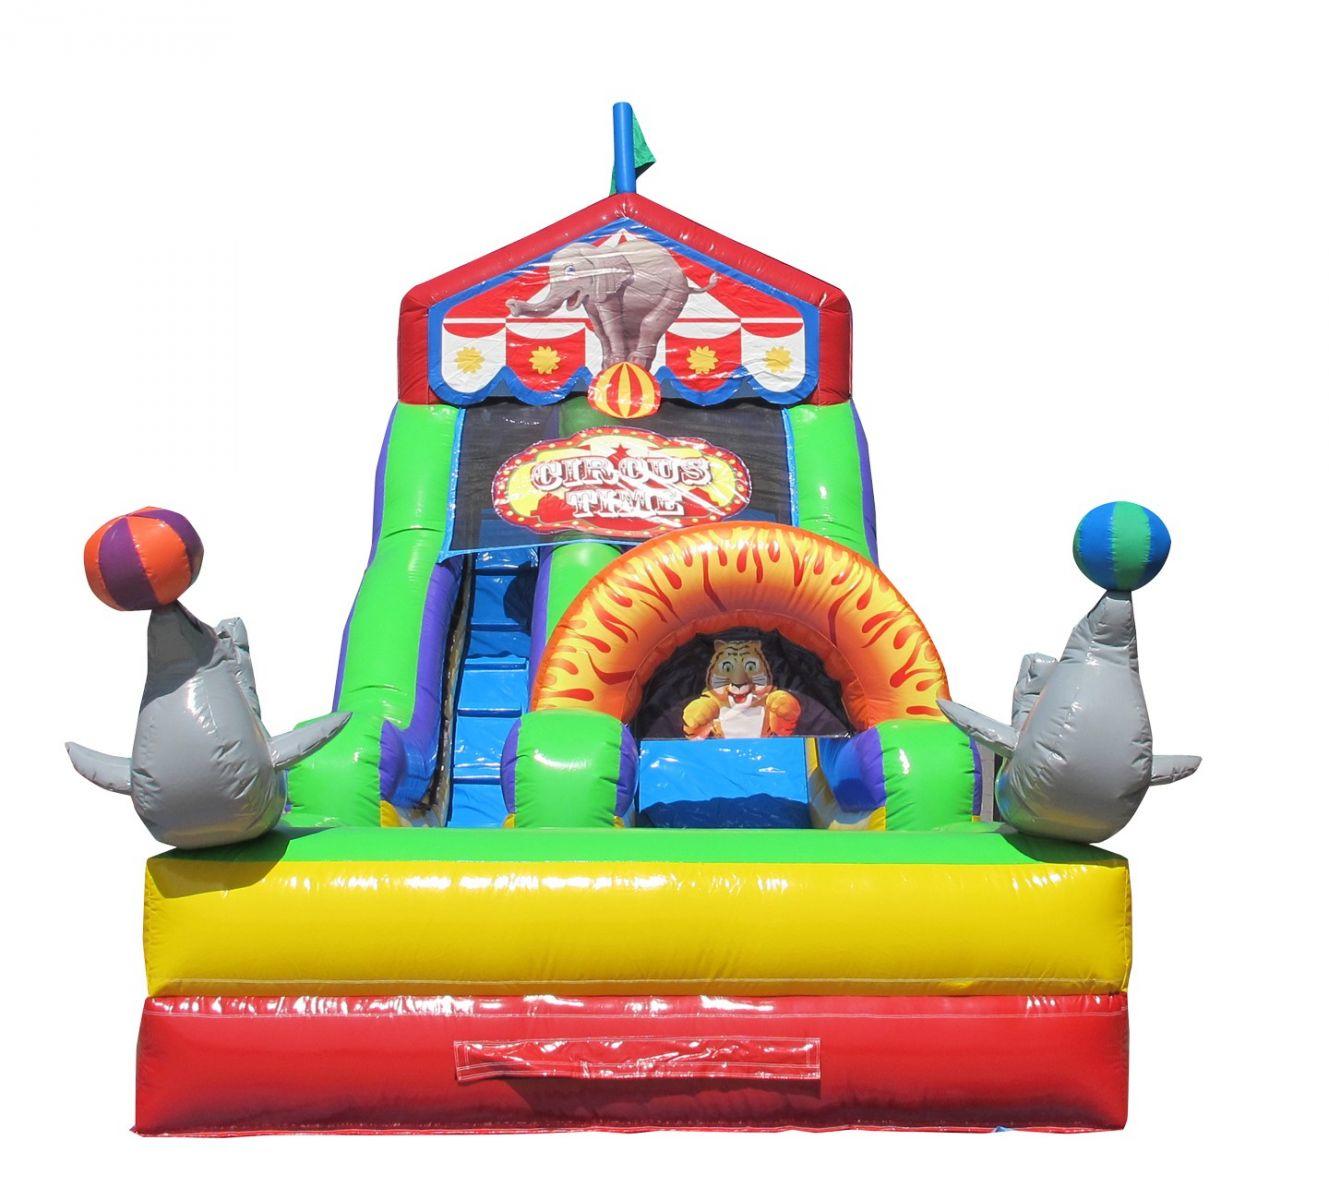 Chicago Circus Time Carnival Themed Waterslide Inflatable Rental Chicago IL